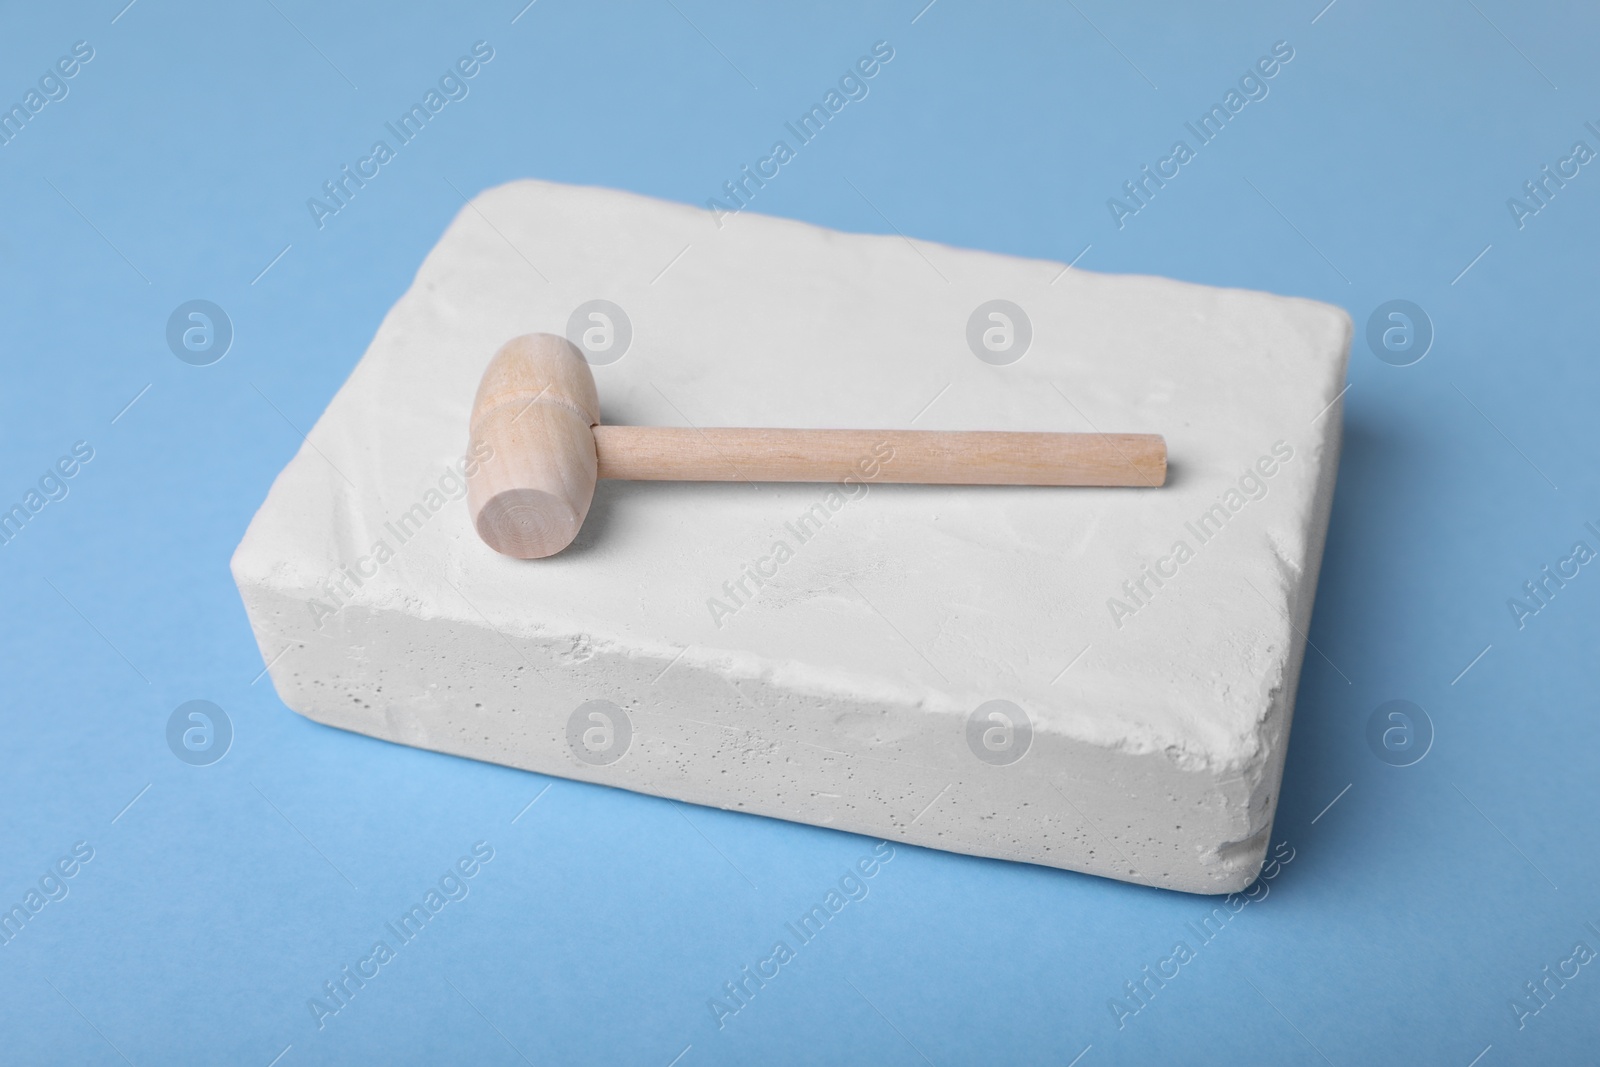 Photo of Educational toy for motor skills development. Excavation kit (plaster and wooden mallet) on light blue background, closeup